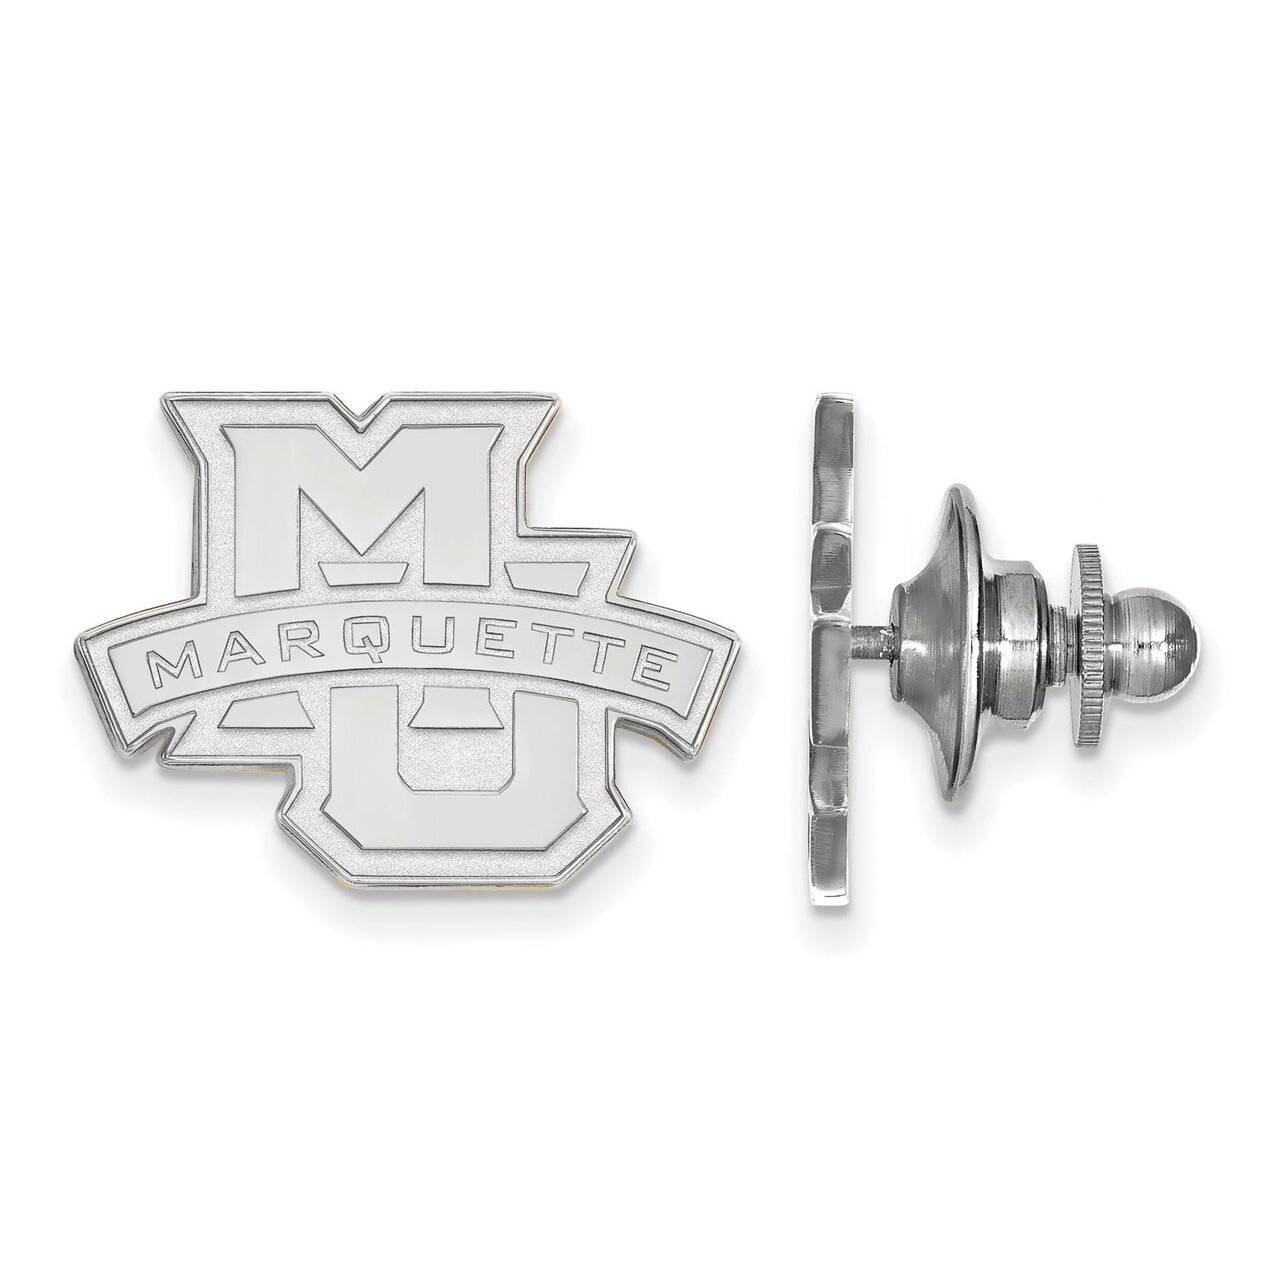 Marquette University Lapel Pin Sterling Silver SS028MAR